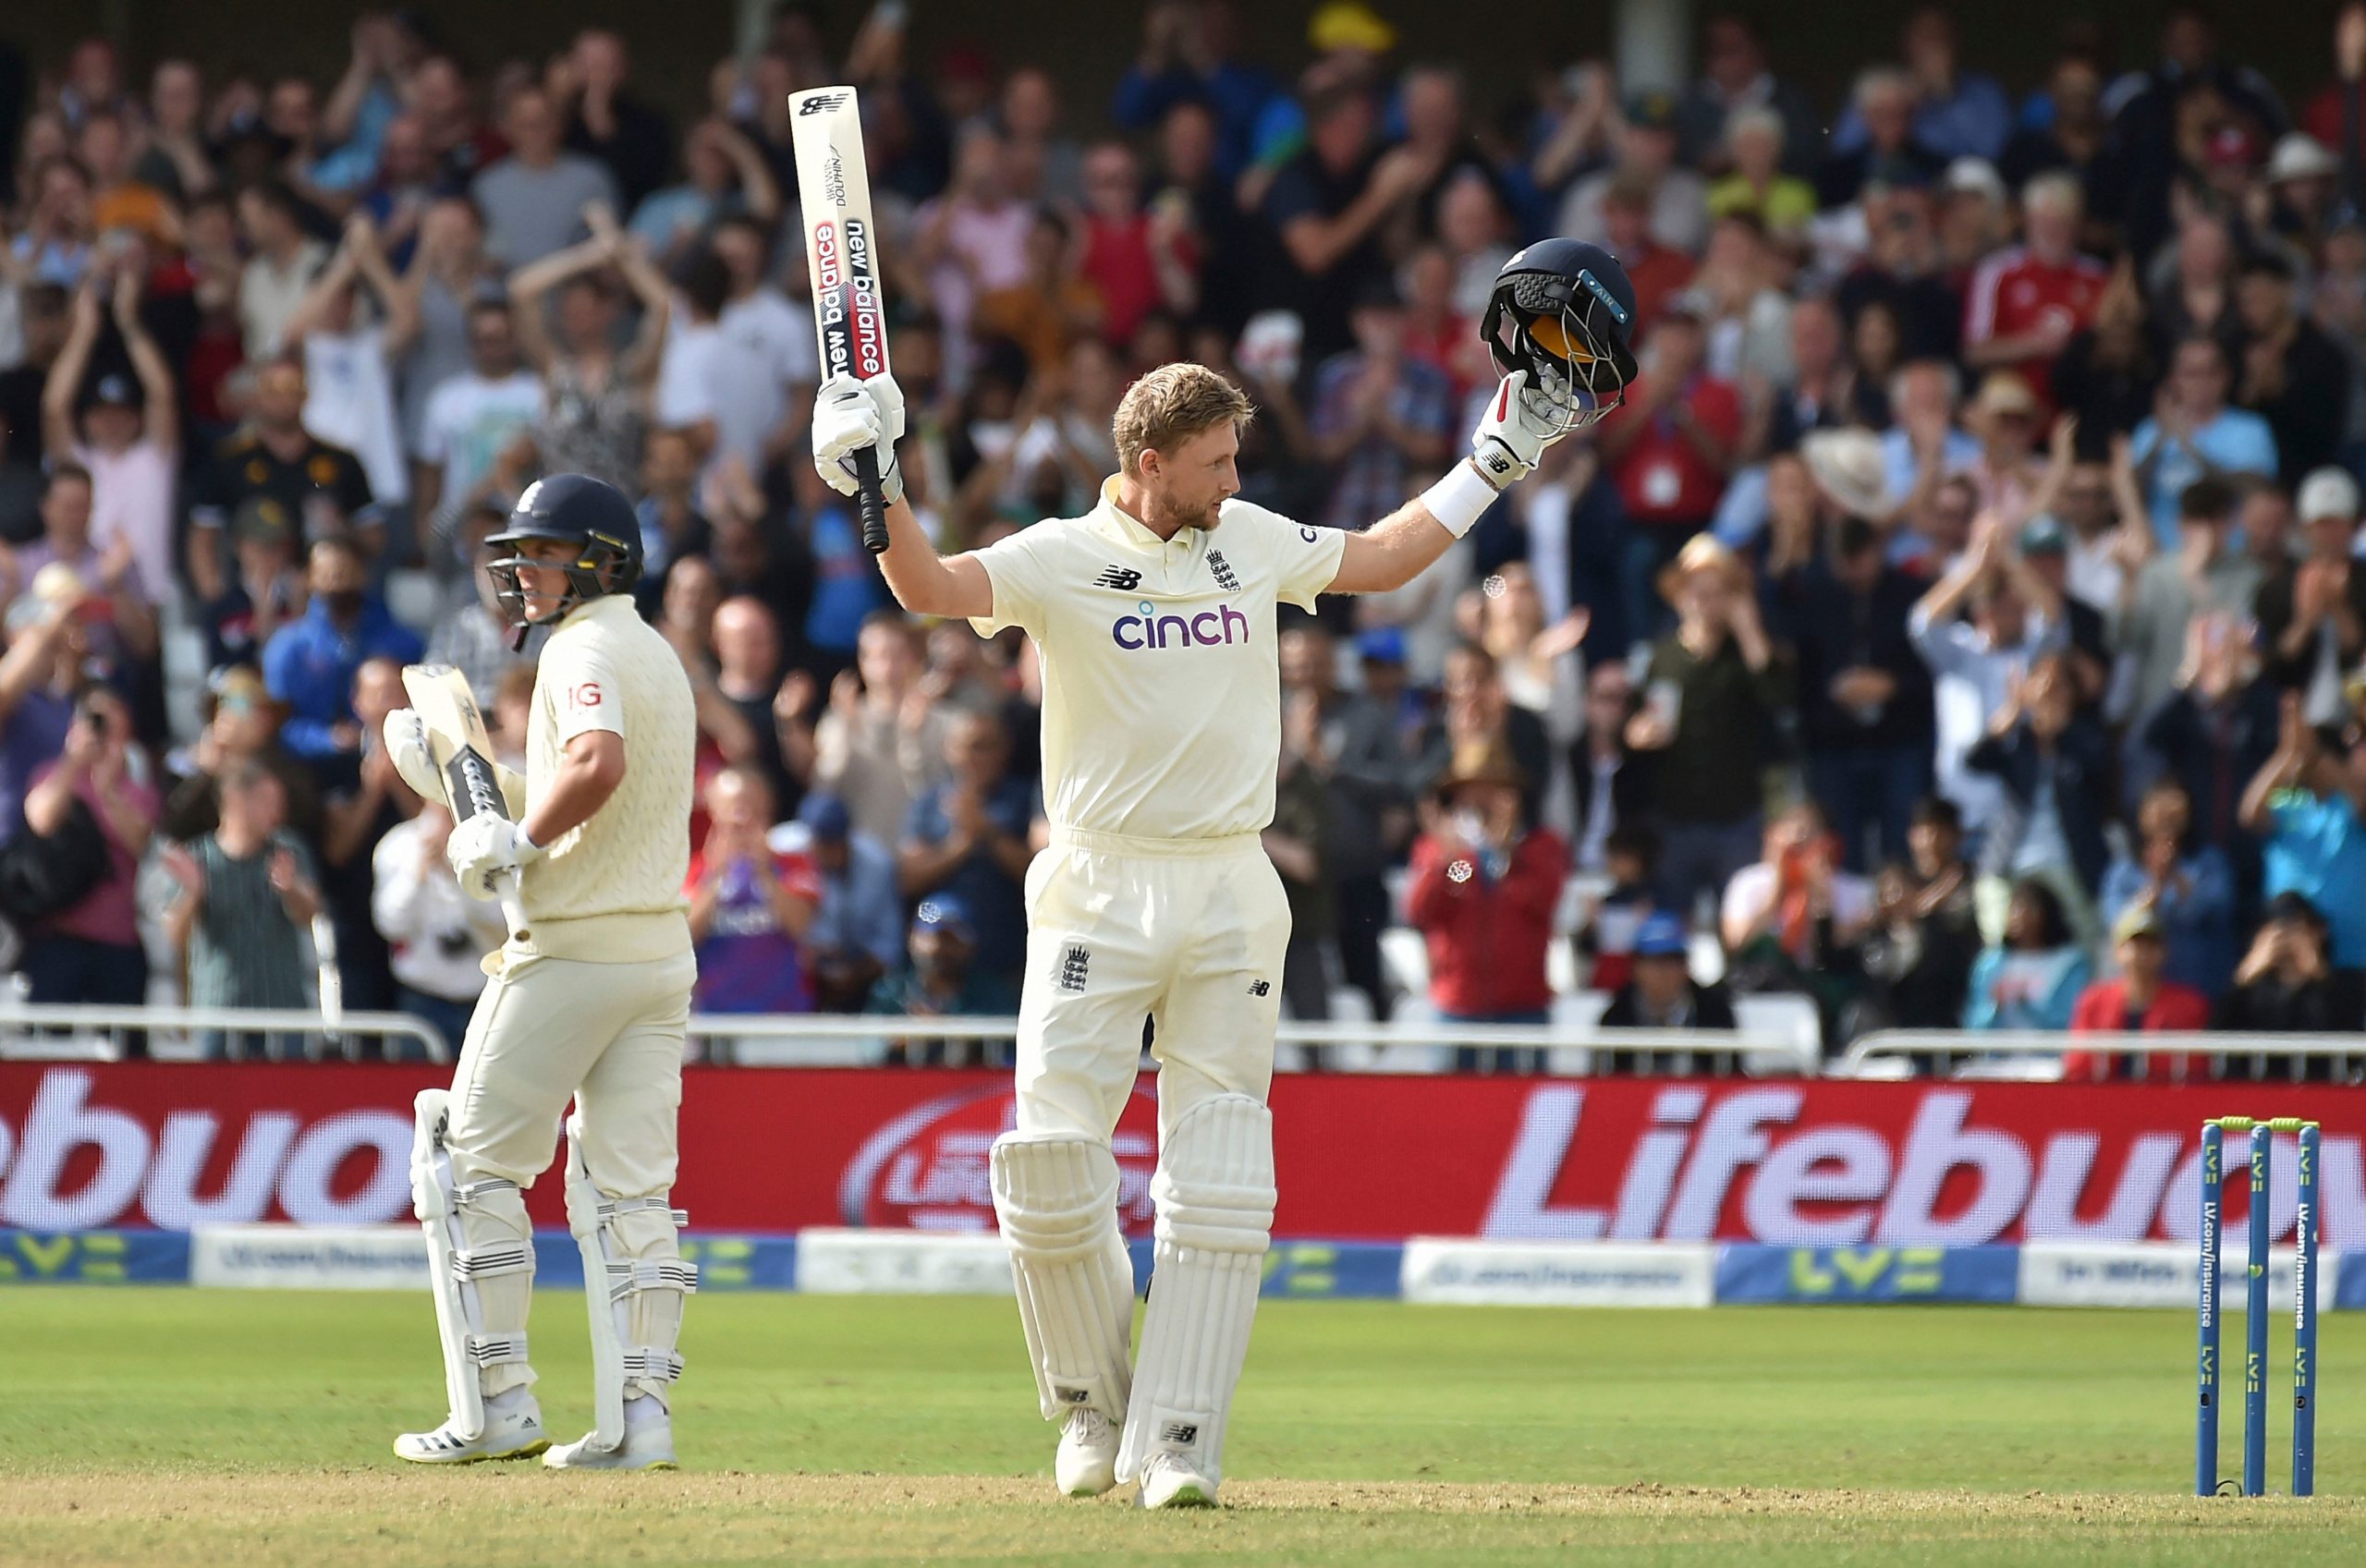 2nd Test: England lead India by 28 runs